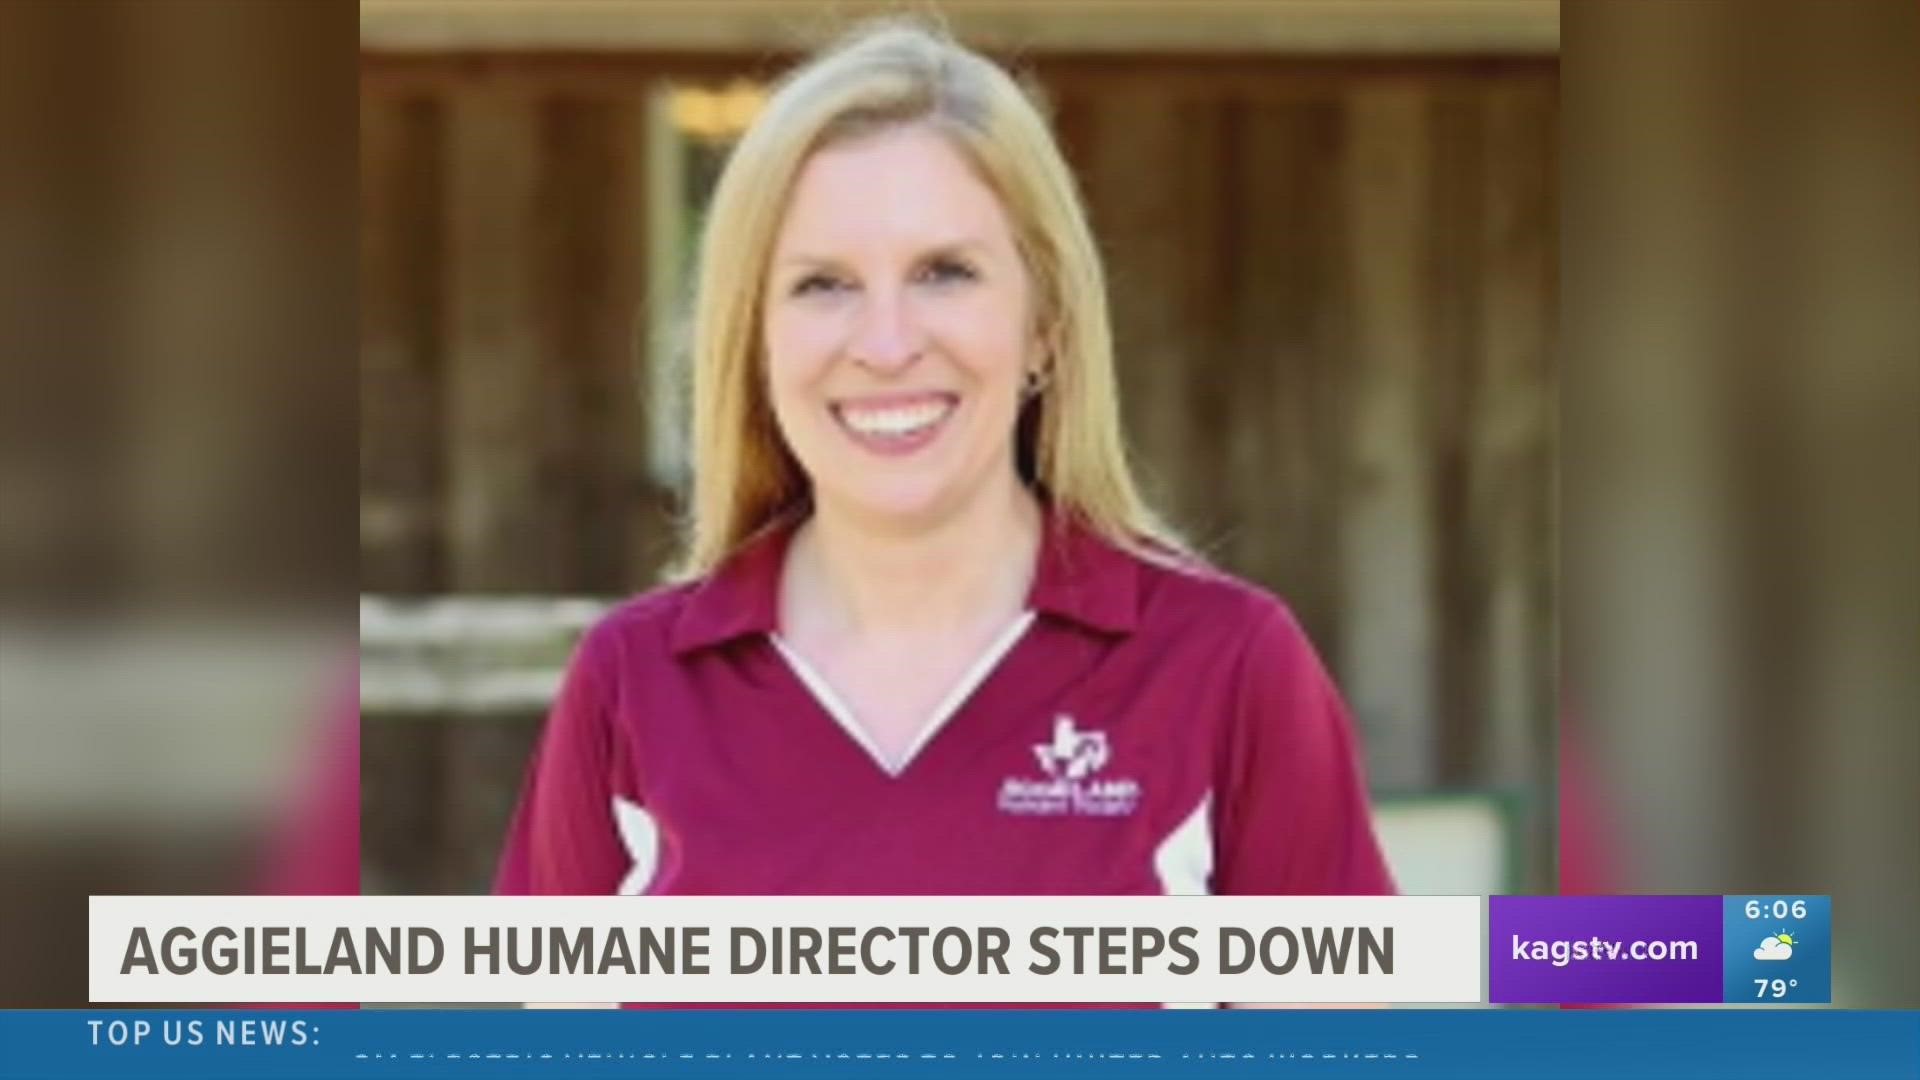 The Aggieland Humane Society will begin a nationwide search to fill the role.